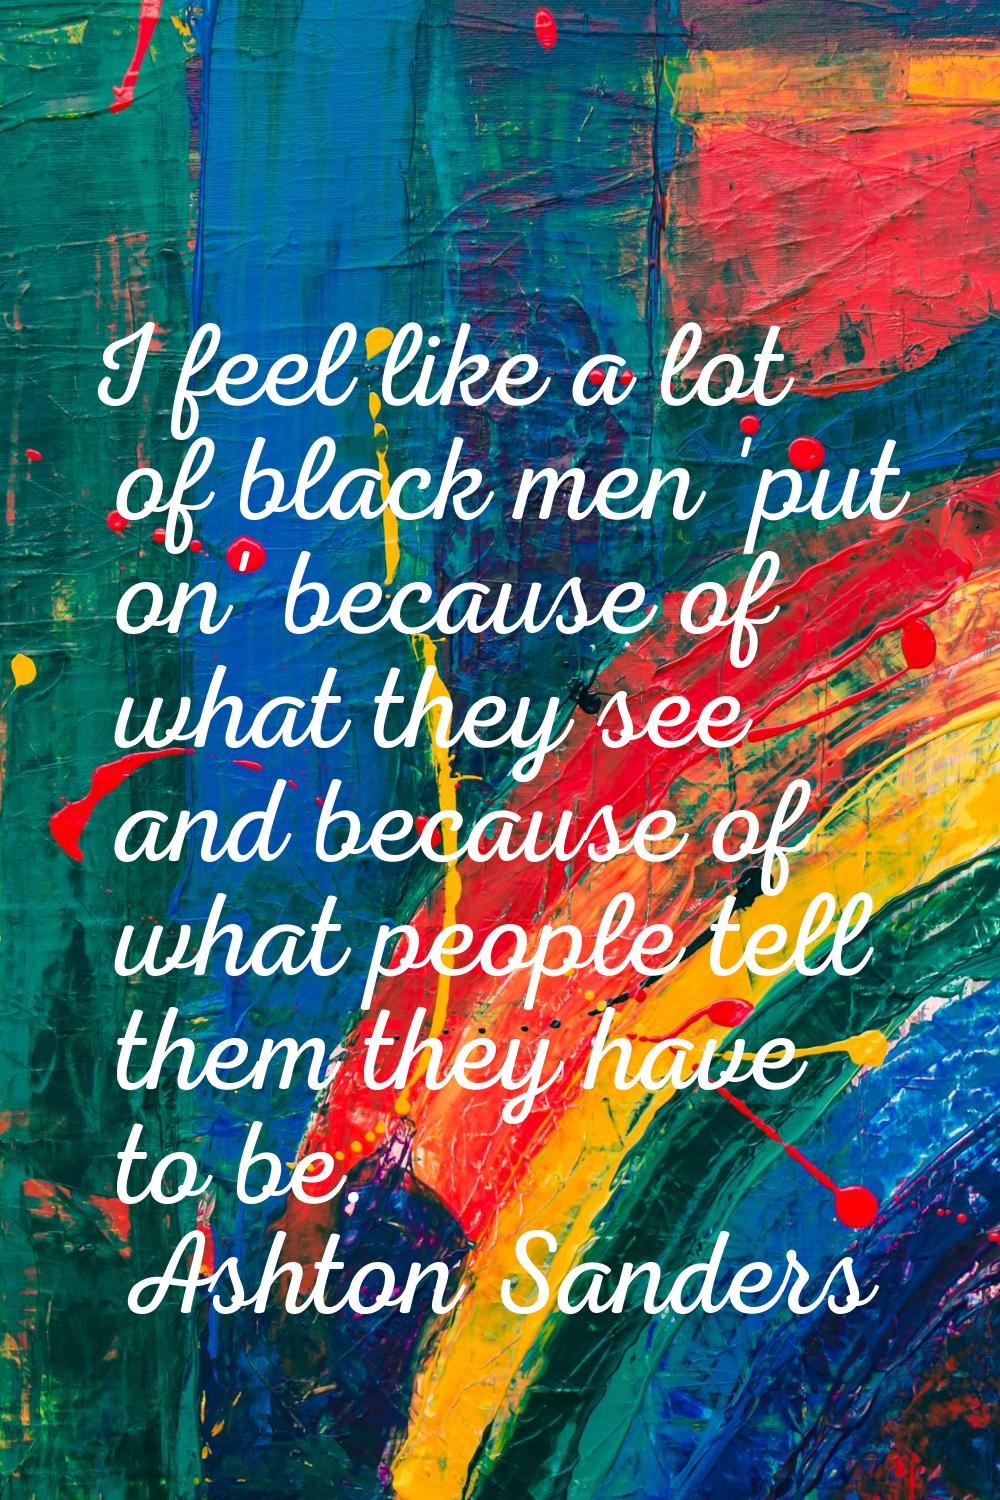 I feel like a lot of black men 'put on' because of what they see and because of what people tell th